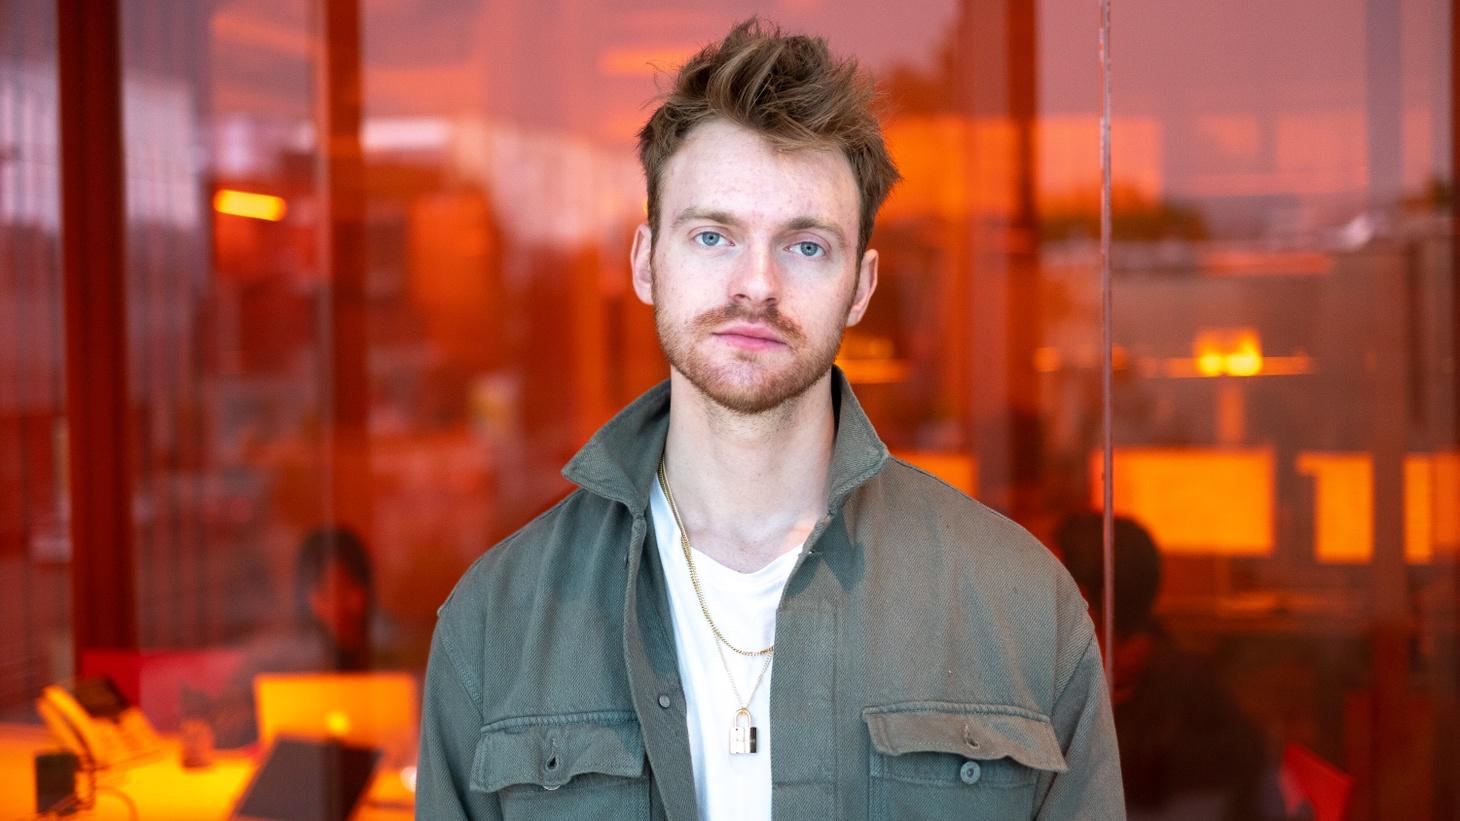 Finneas O'Connell on his sister Billie Eilish becoming a